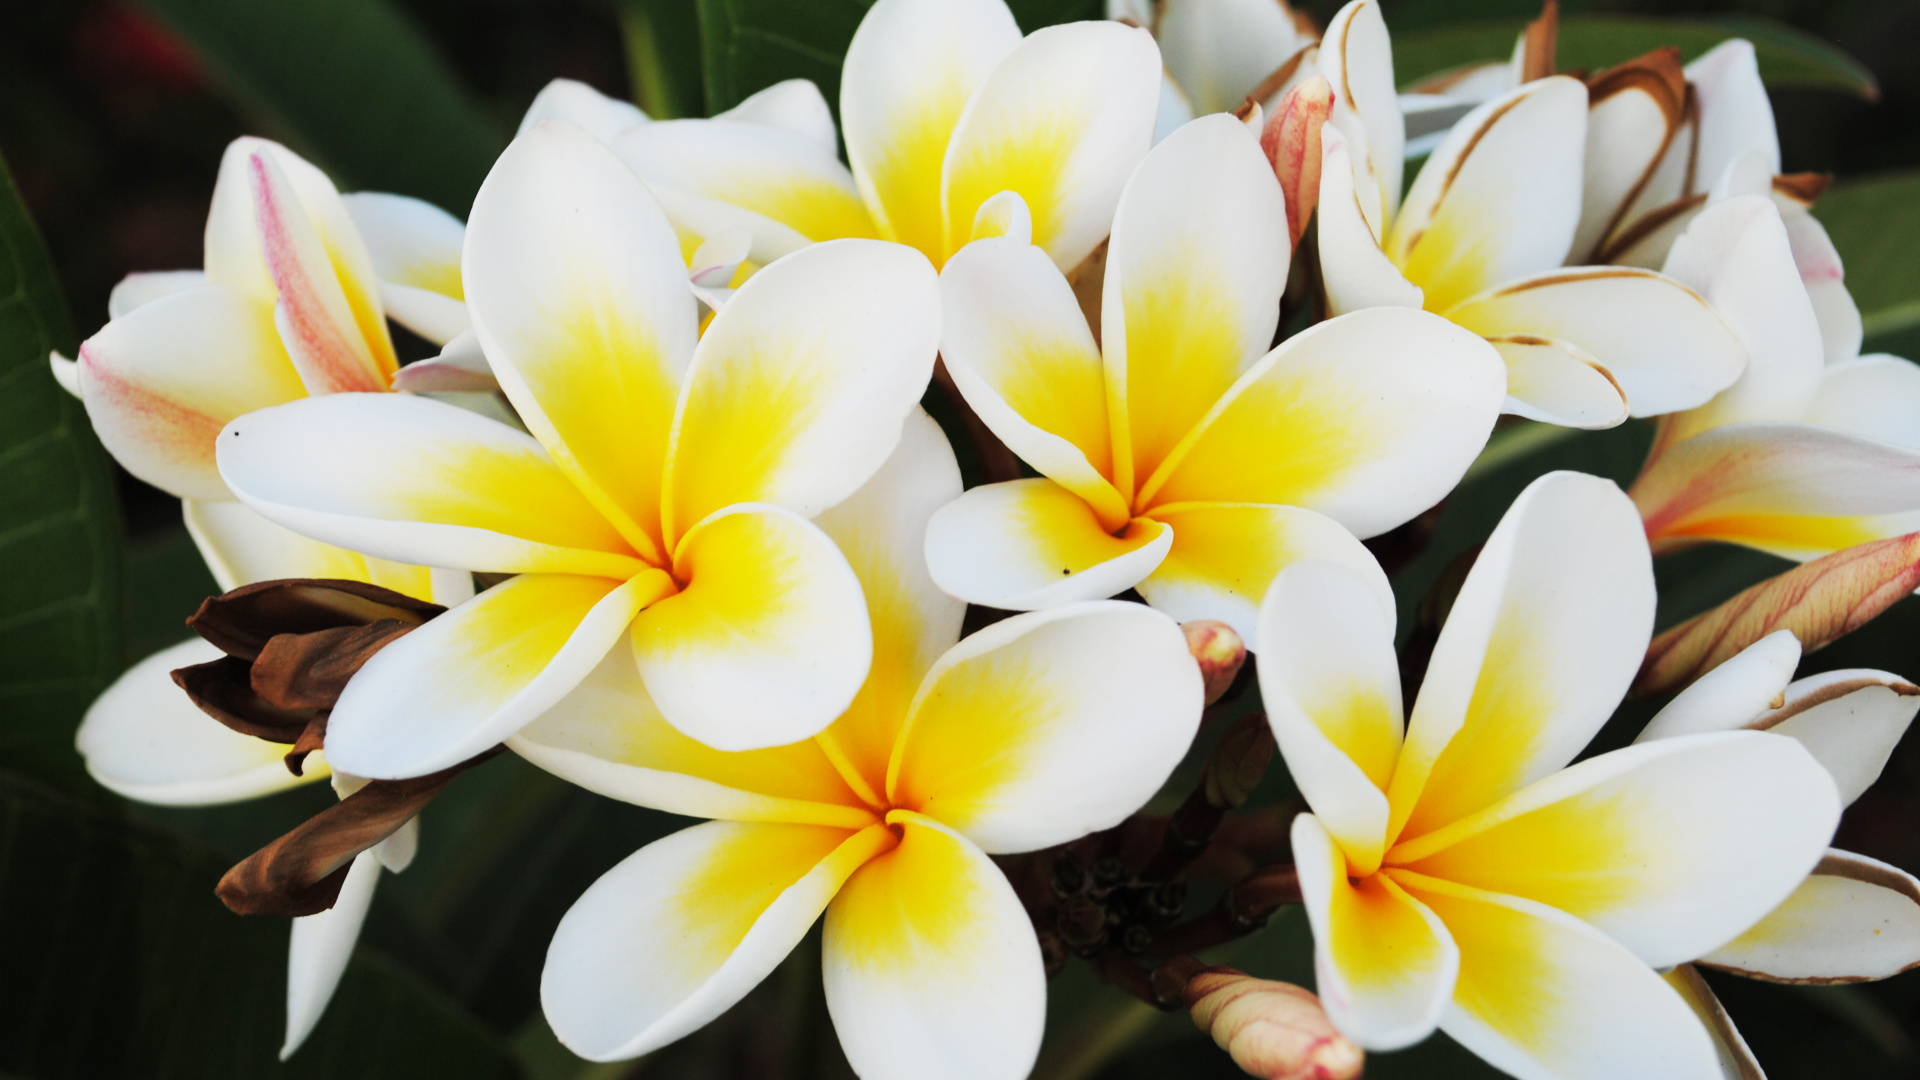 White and Yellow Flower in Close up Photography. Wallpaper in 1920x1080 Resolution